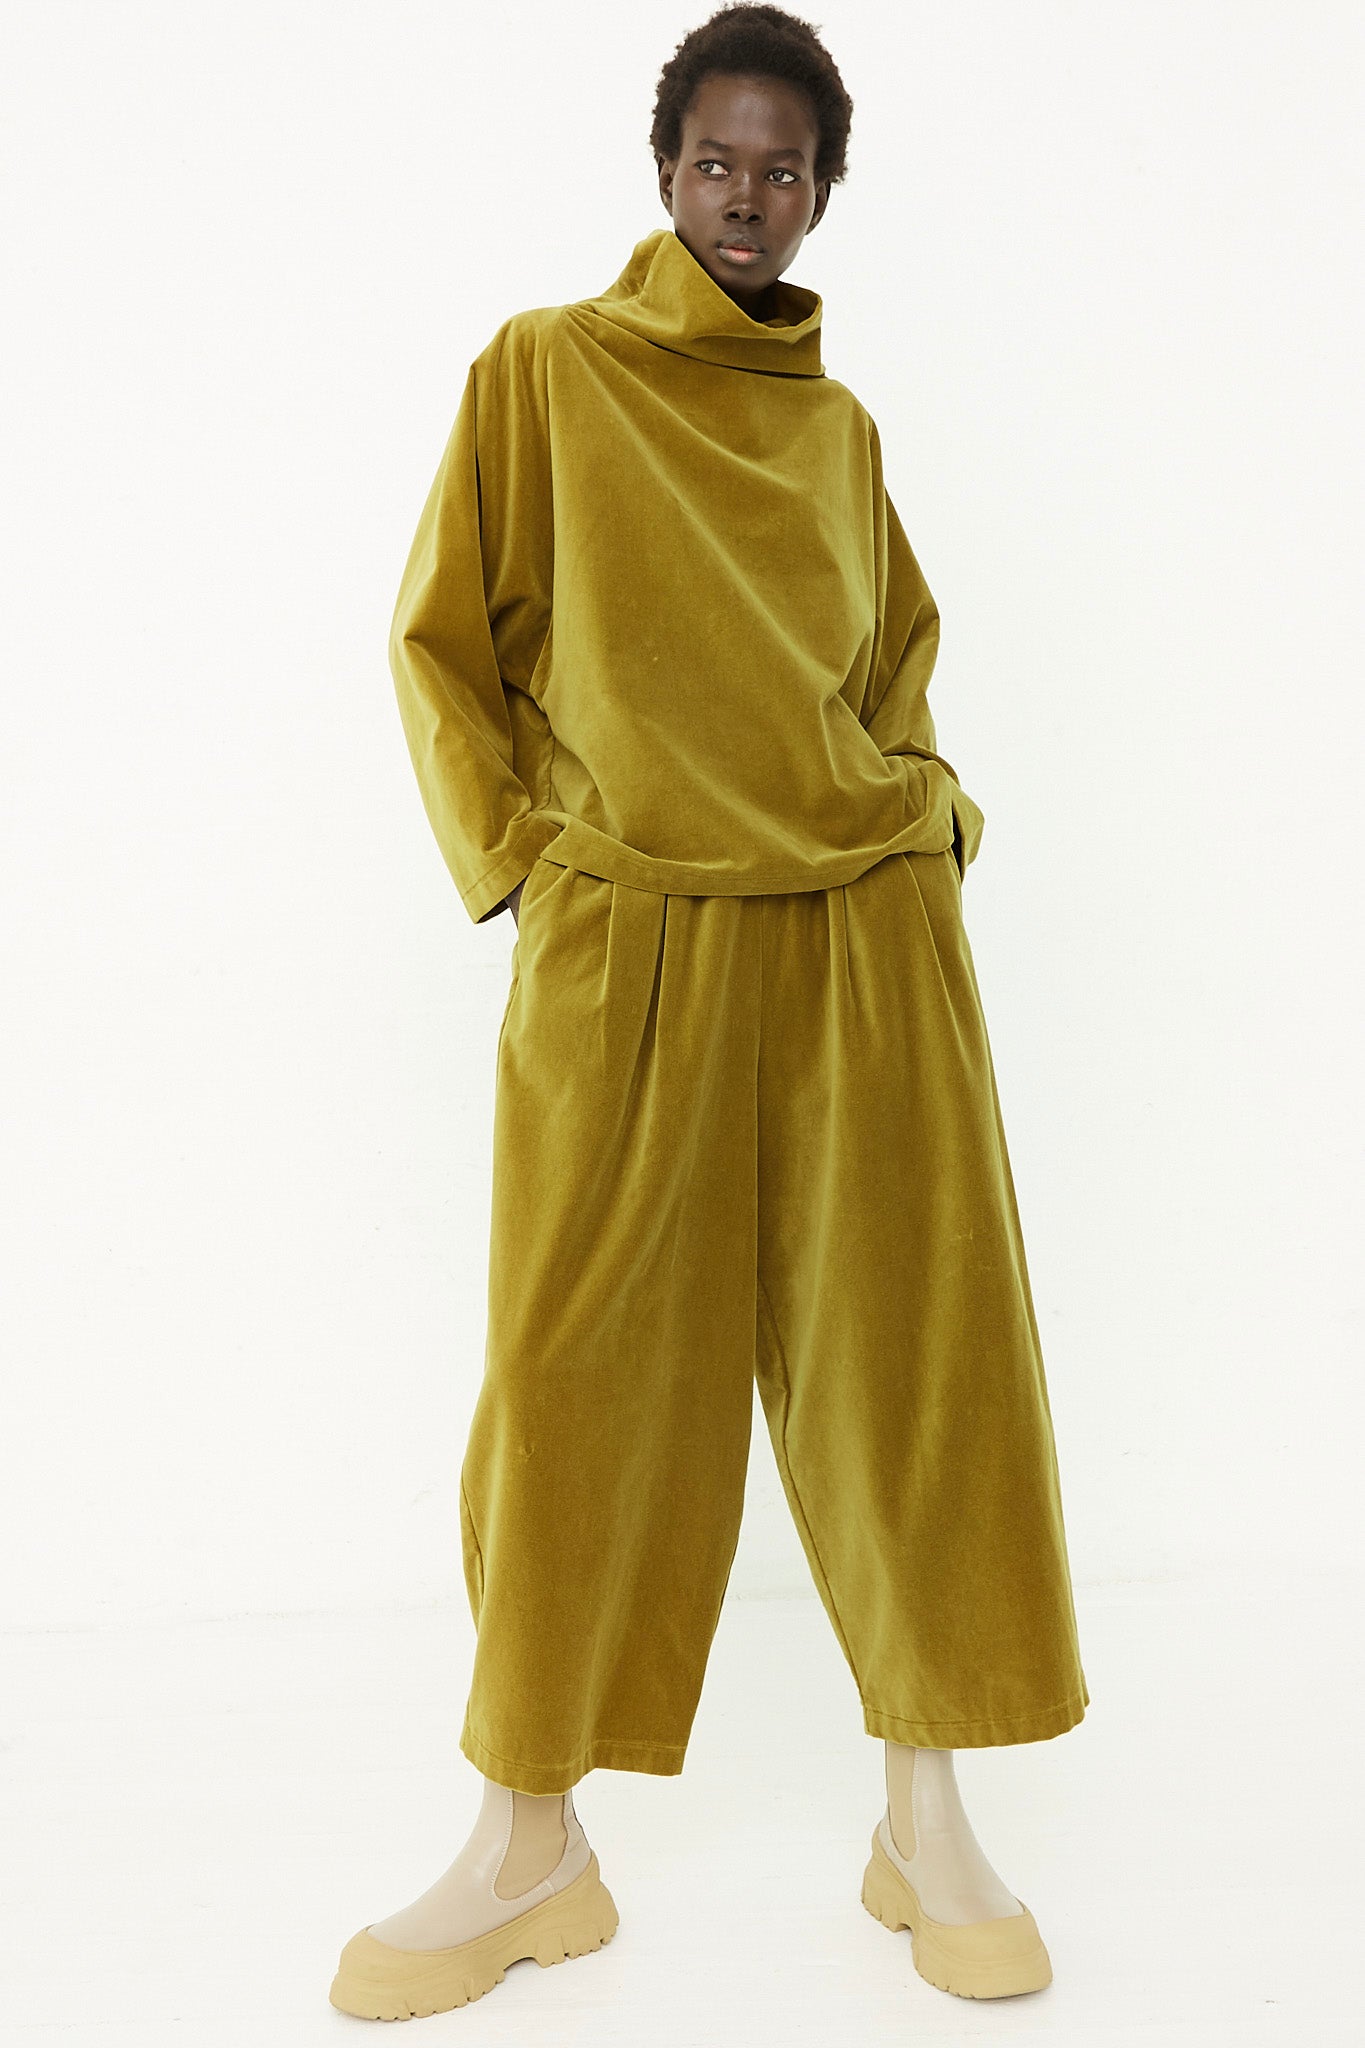 The model is wearing an olive cotton velveteen jumpsuit with an elasticated waist.